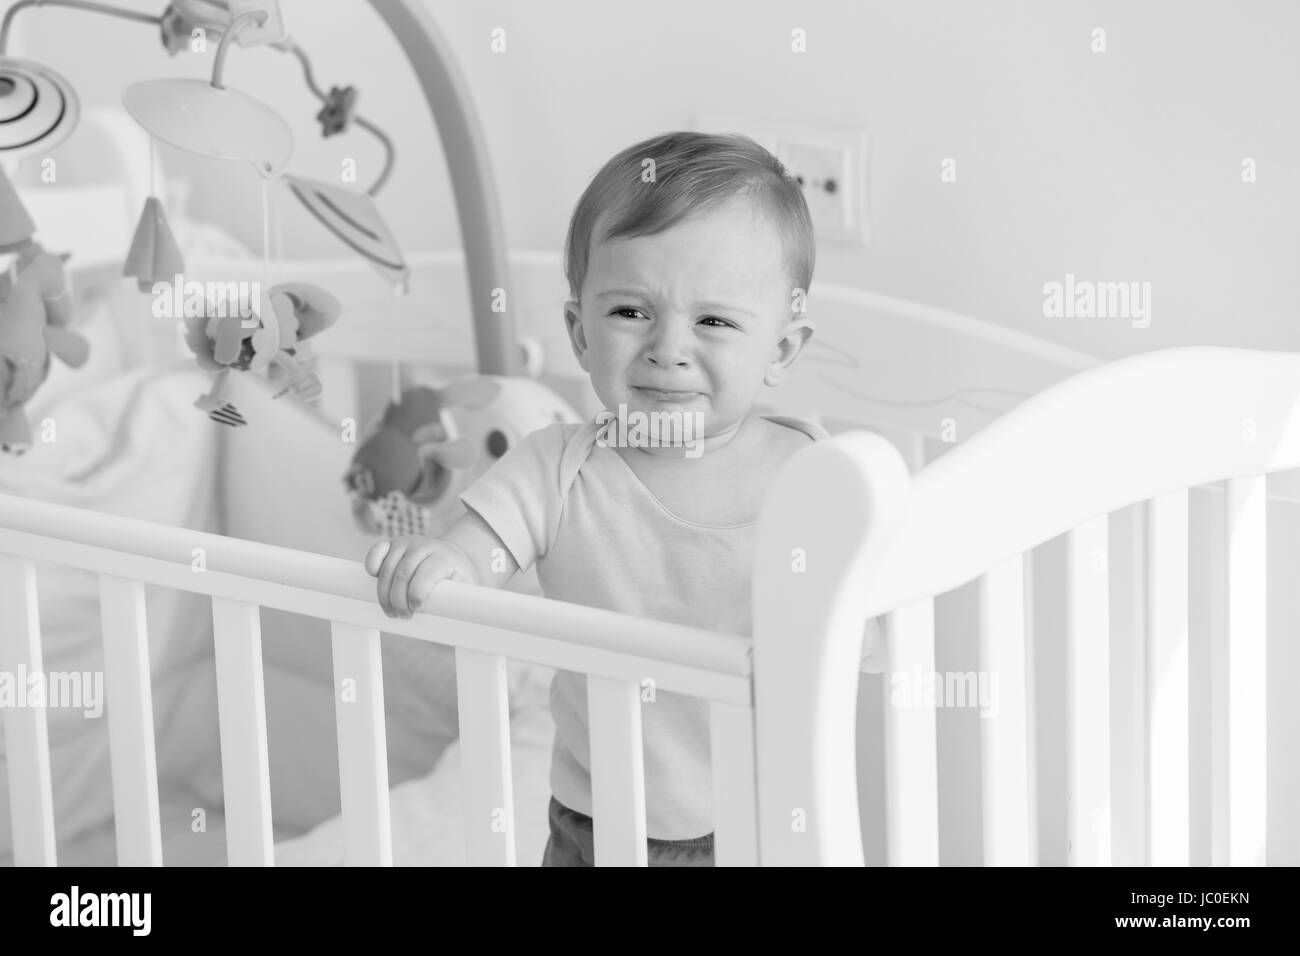 Black and white portrait of baby boy standing in crib and crying Stock Photo